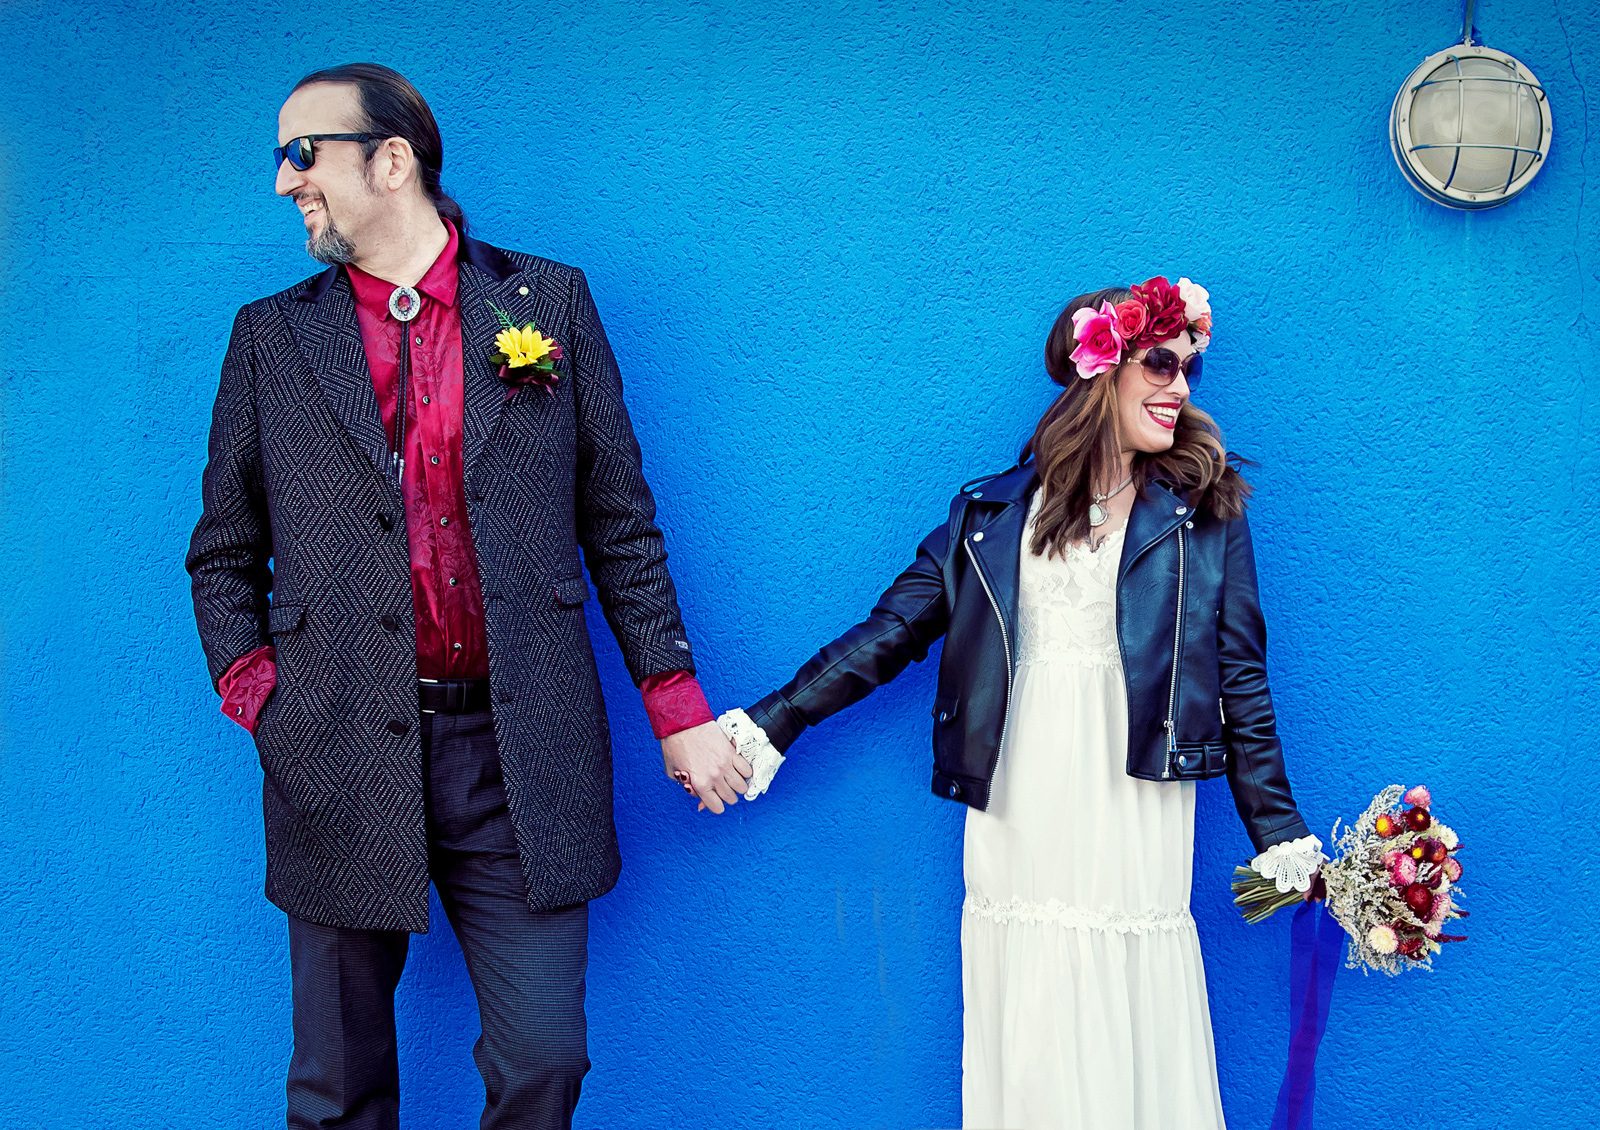 Islington bride and groom hand in hand by blue wall image